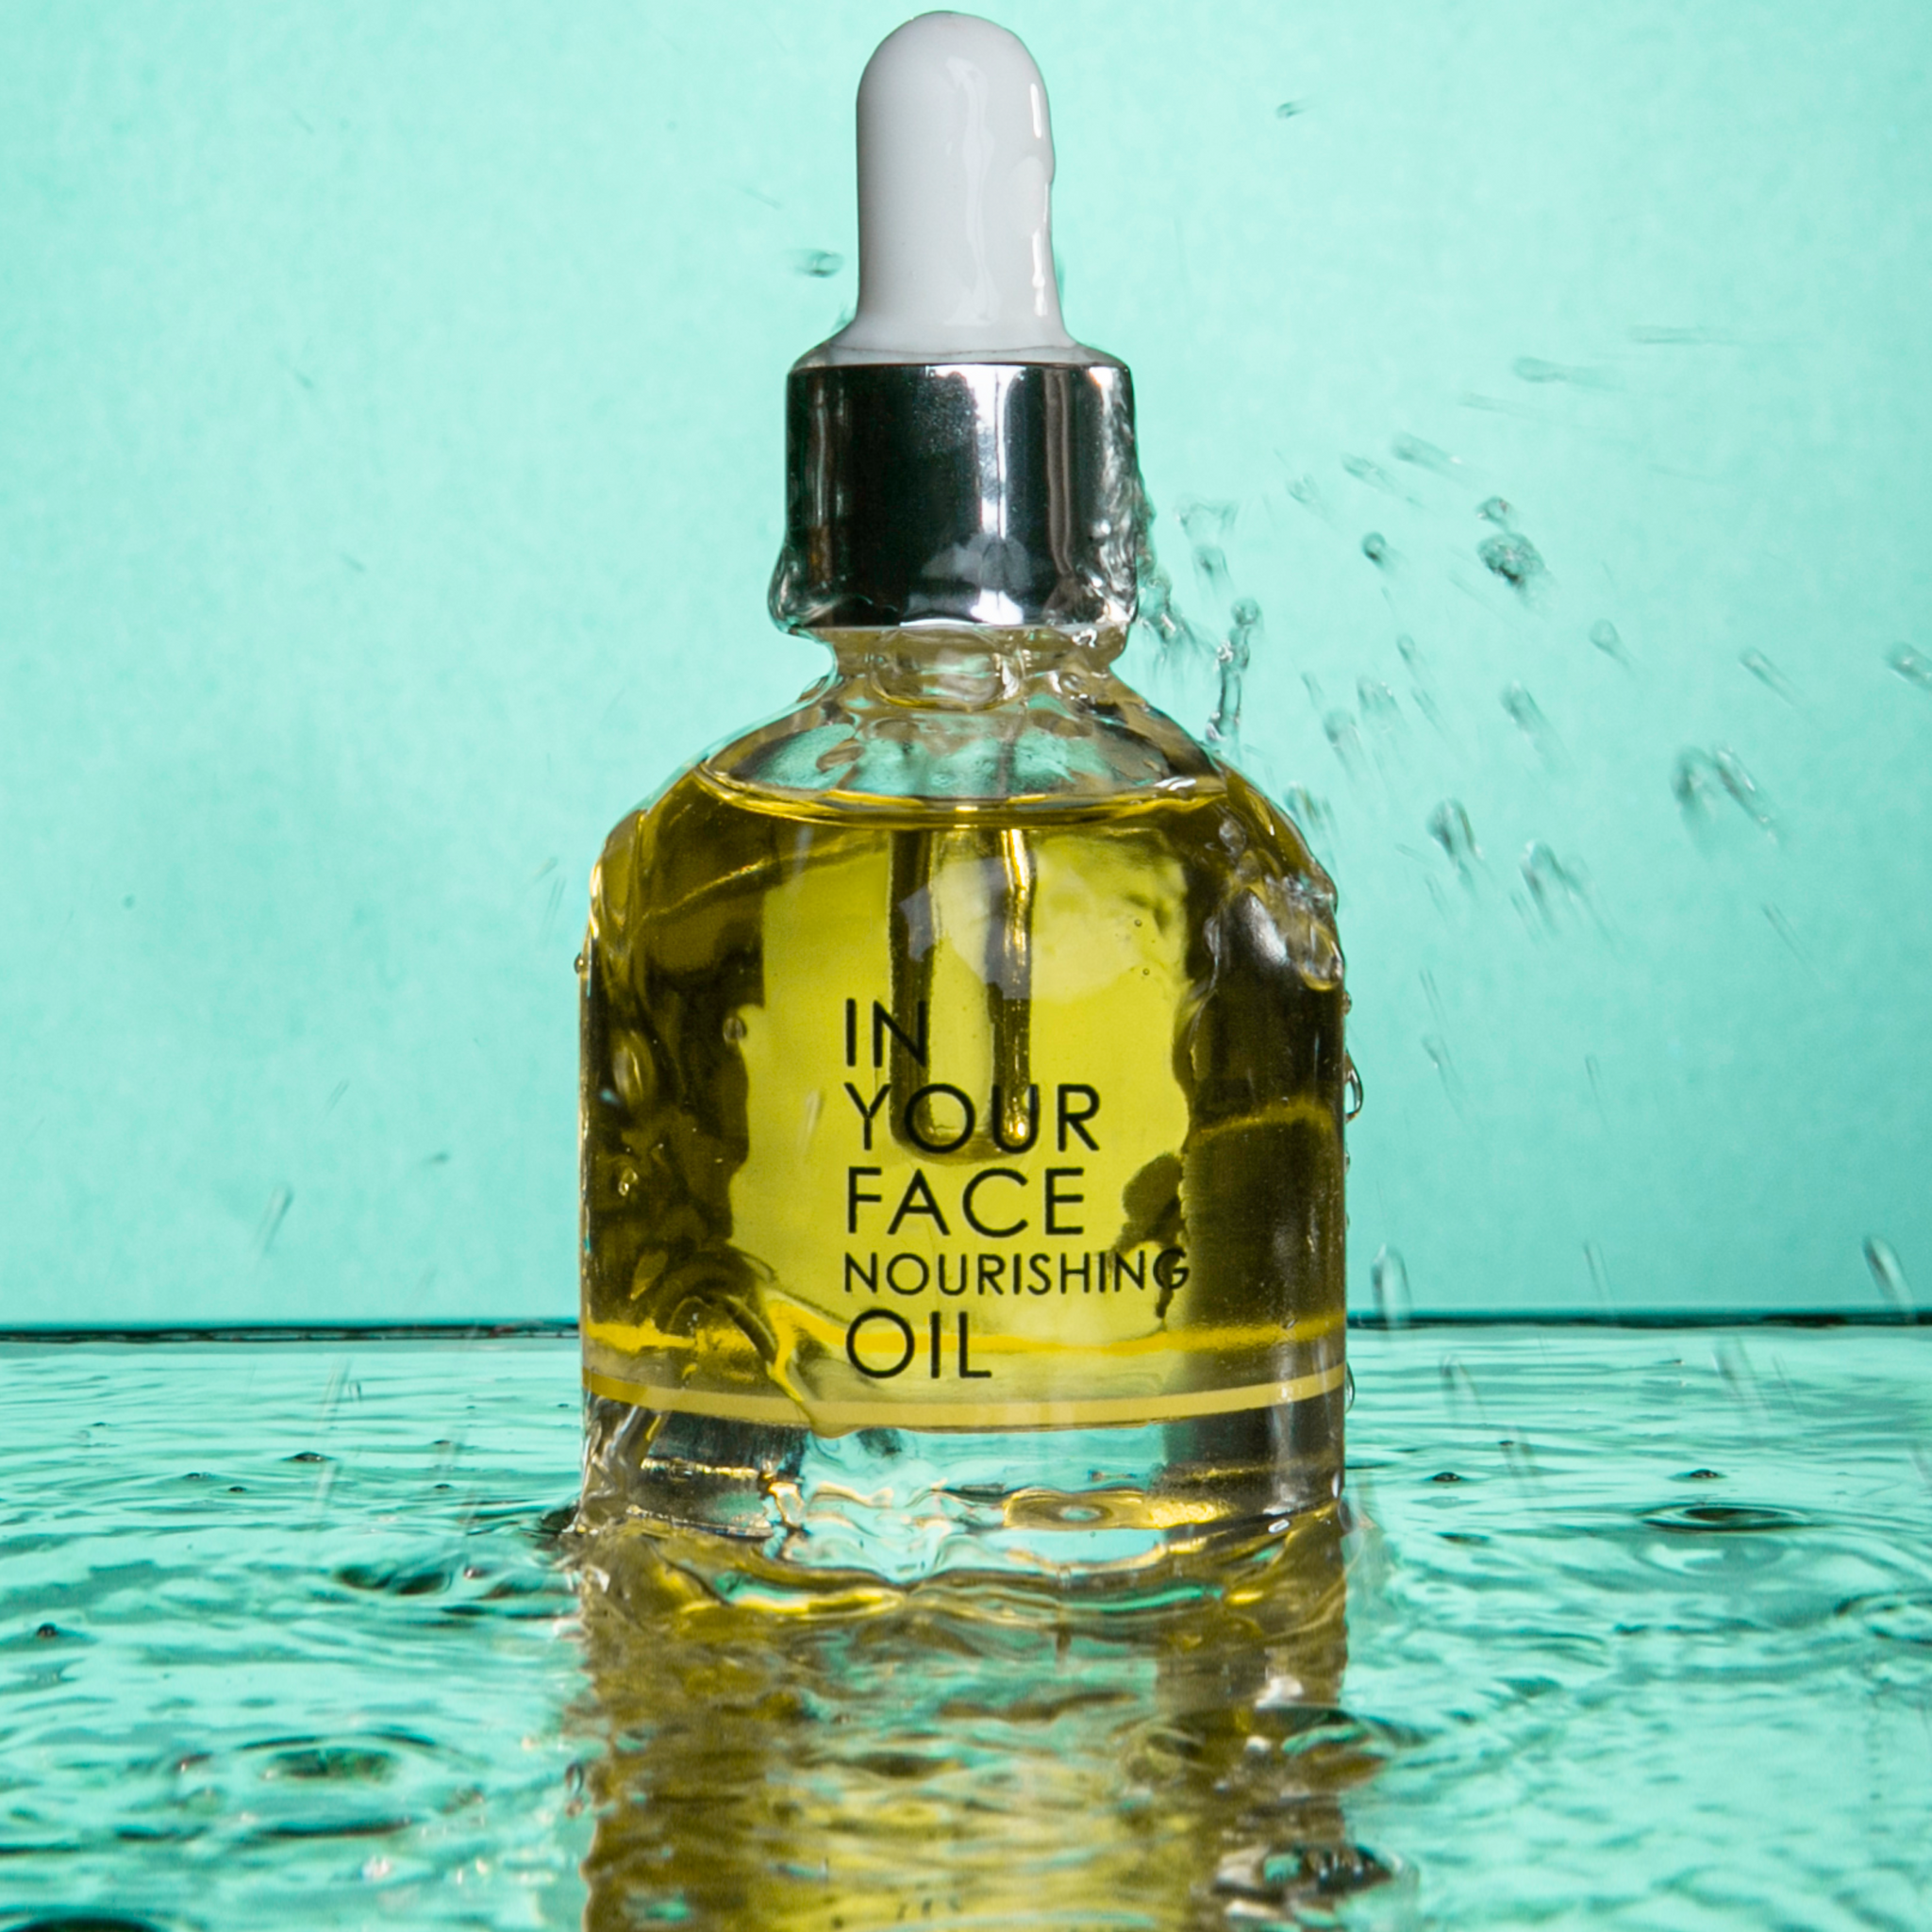 5 REASONS EVERYONE NEEDS A FACE OIL